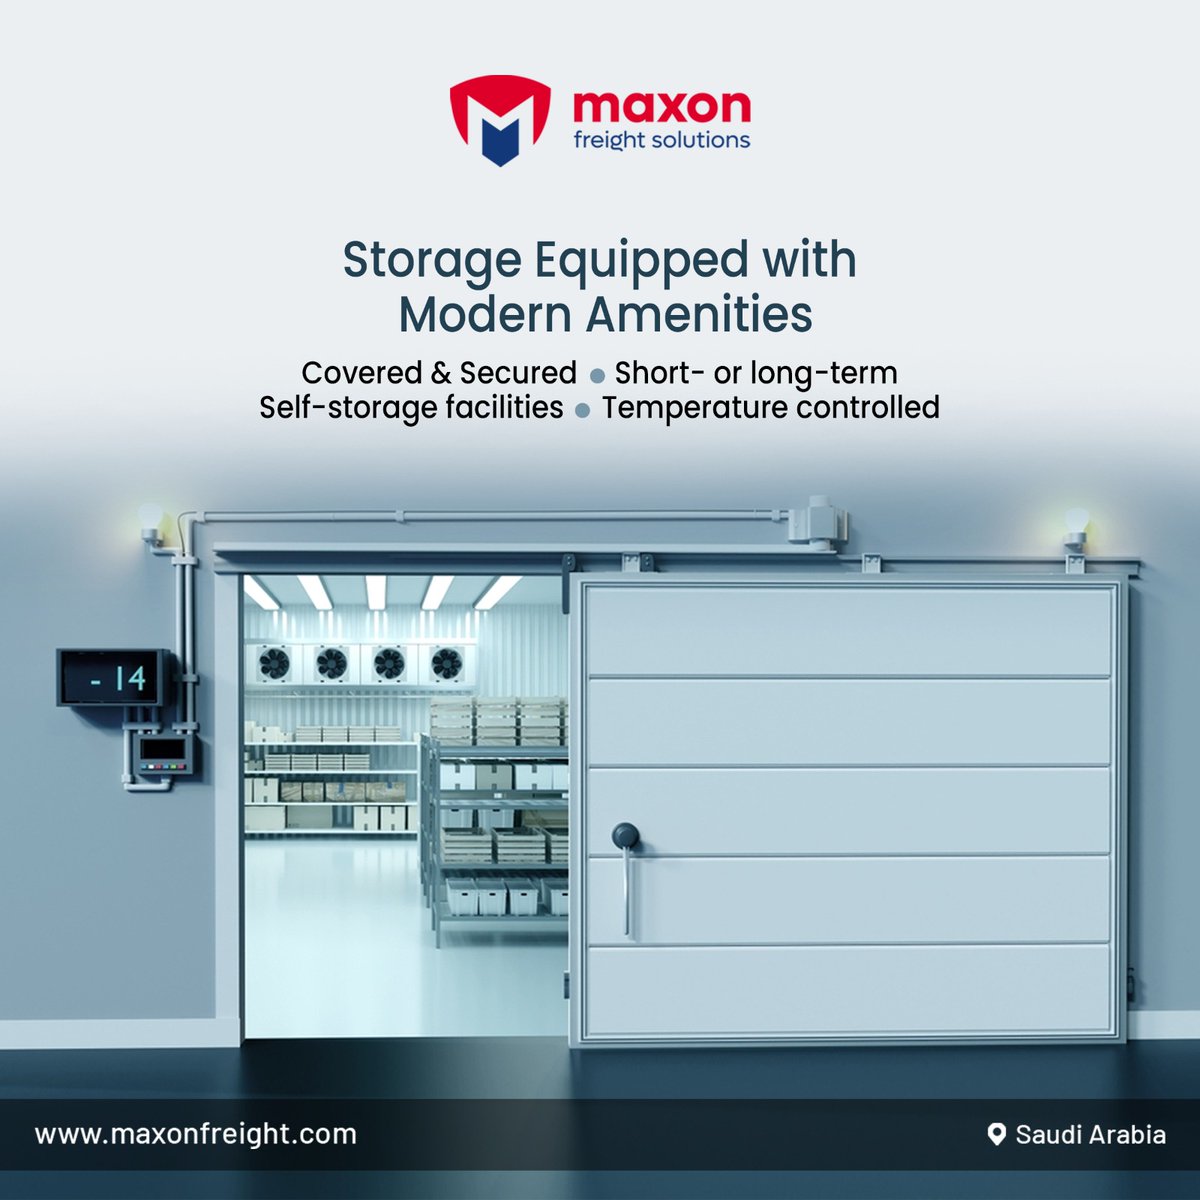 Discover the ultimate storage solution with  modern amenities.

#maxonfreightsolutions #maxon #freightsolutions #saudiarabia  #transportation  #freightsolutionsinKSA #KSA #storagesolutions 
 #ModernConvenience